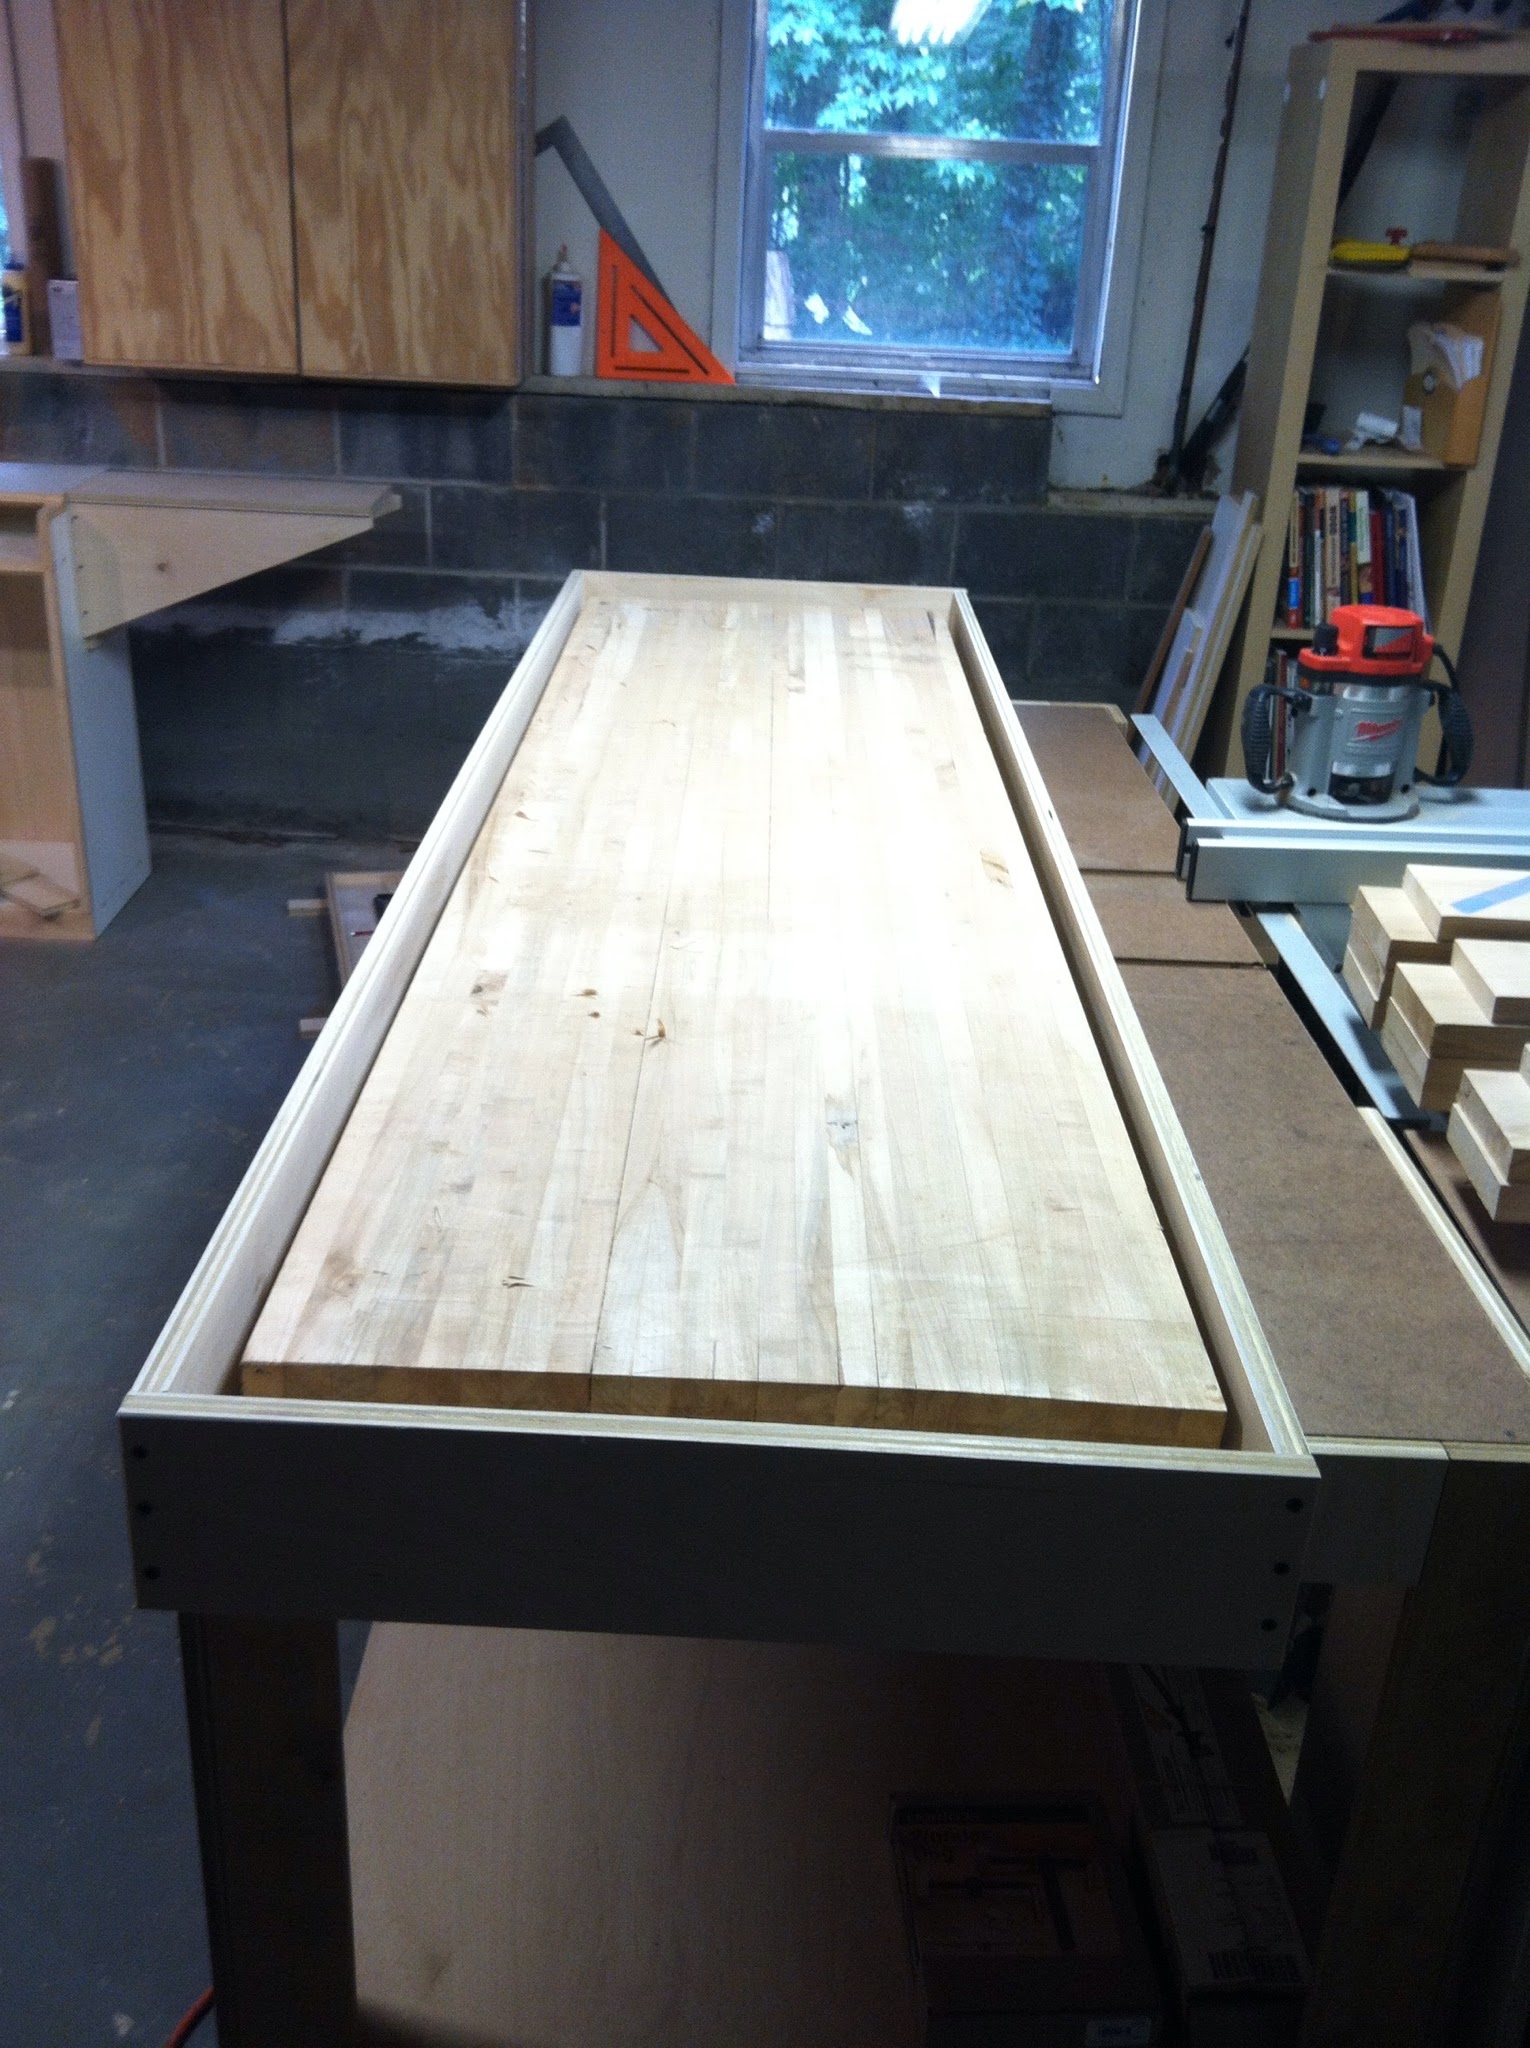 Router frame placed around the benchtop to be flattened